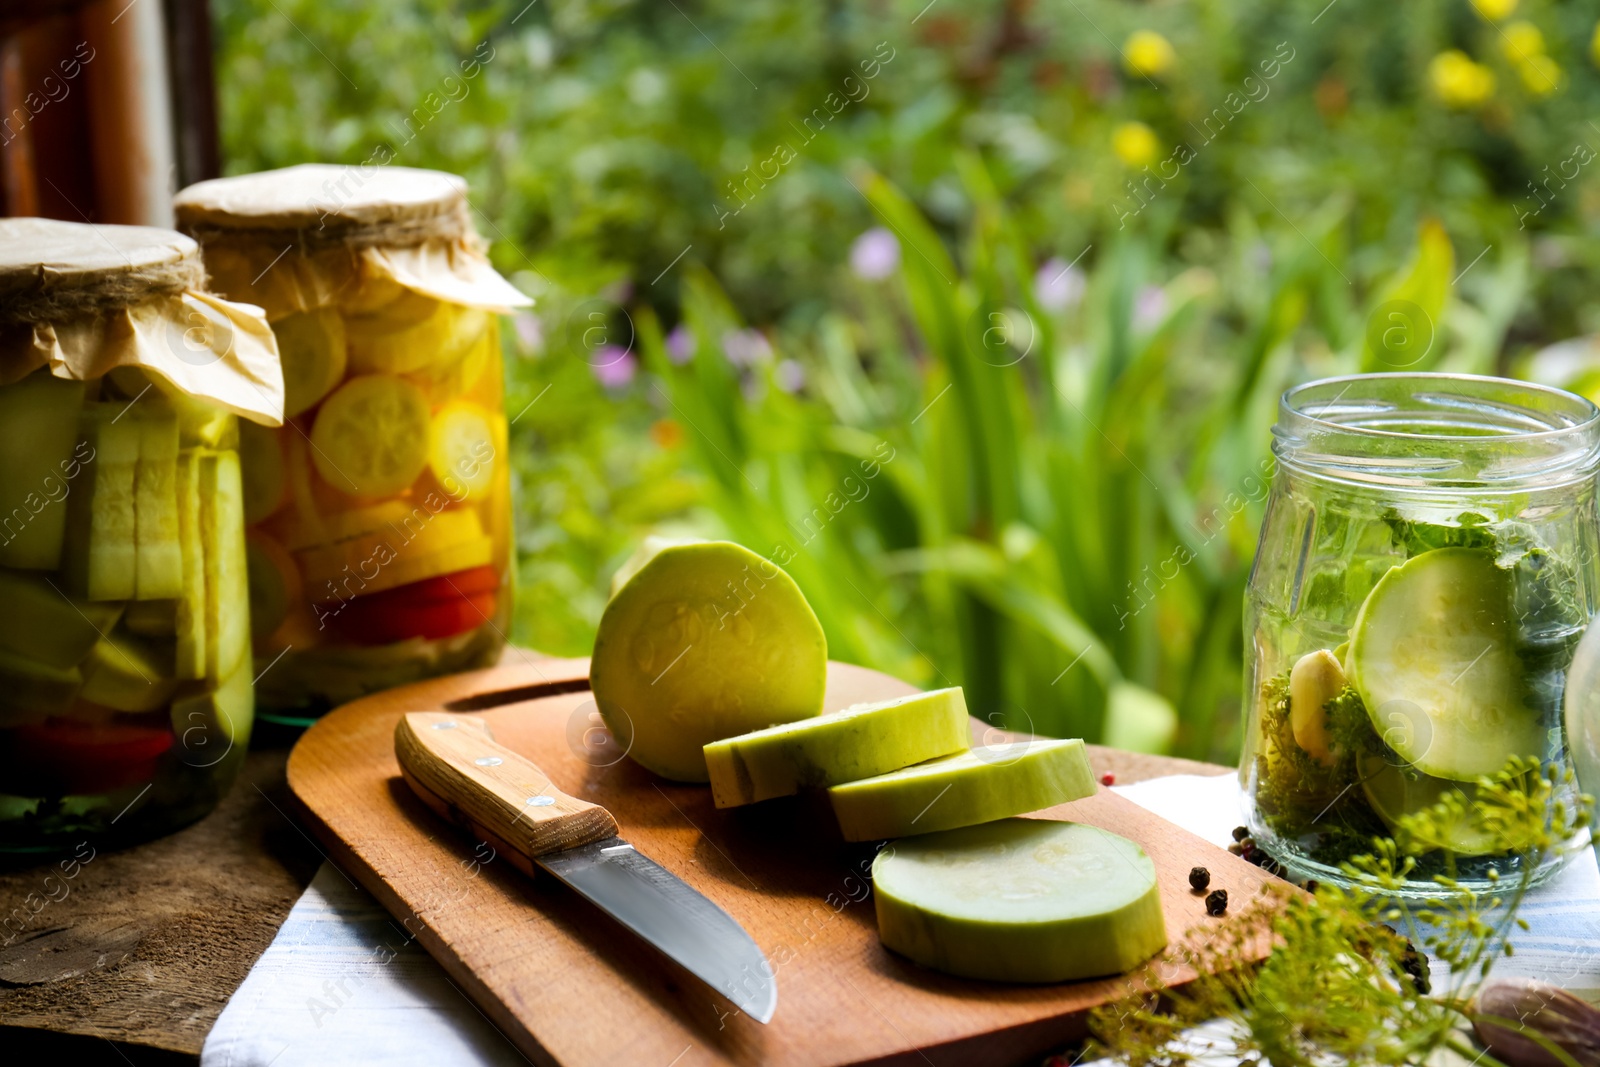 Photo of Cut fresh zucchini and jars of pickled vegetables on wooden table